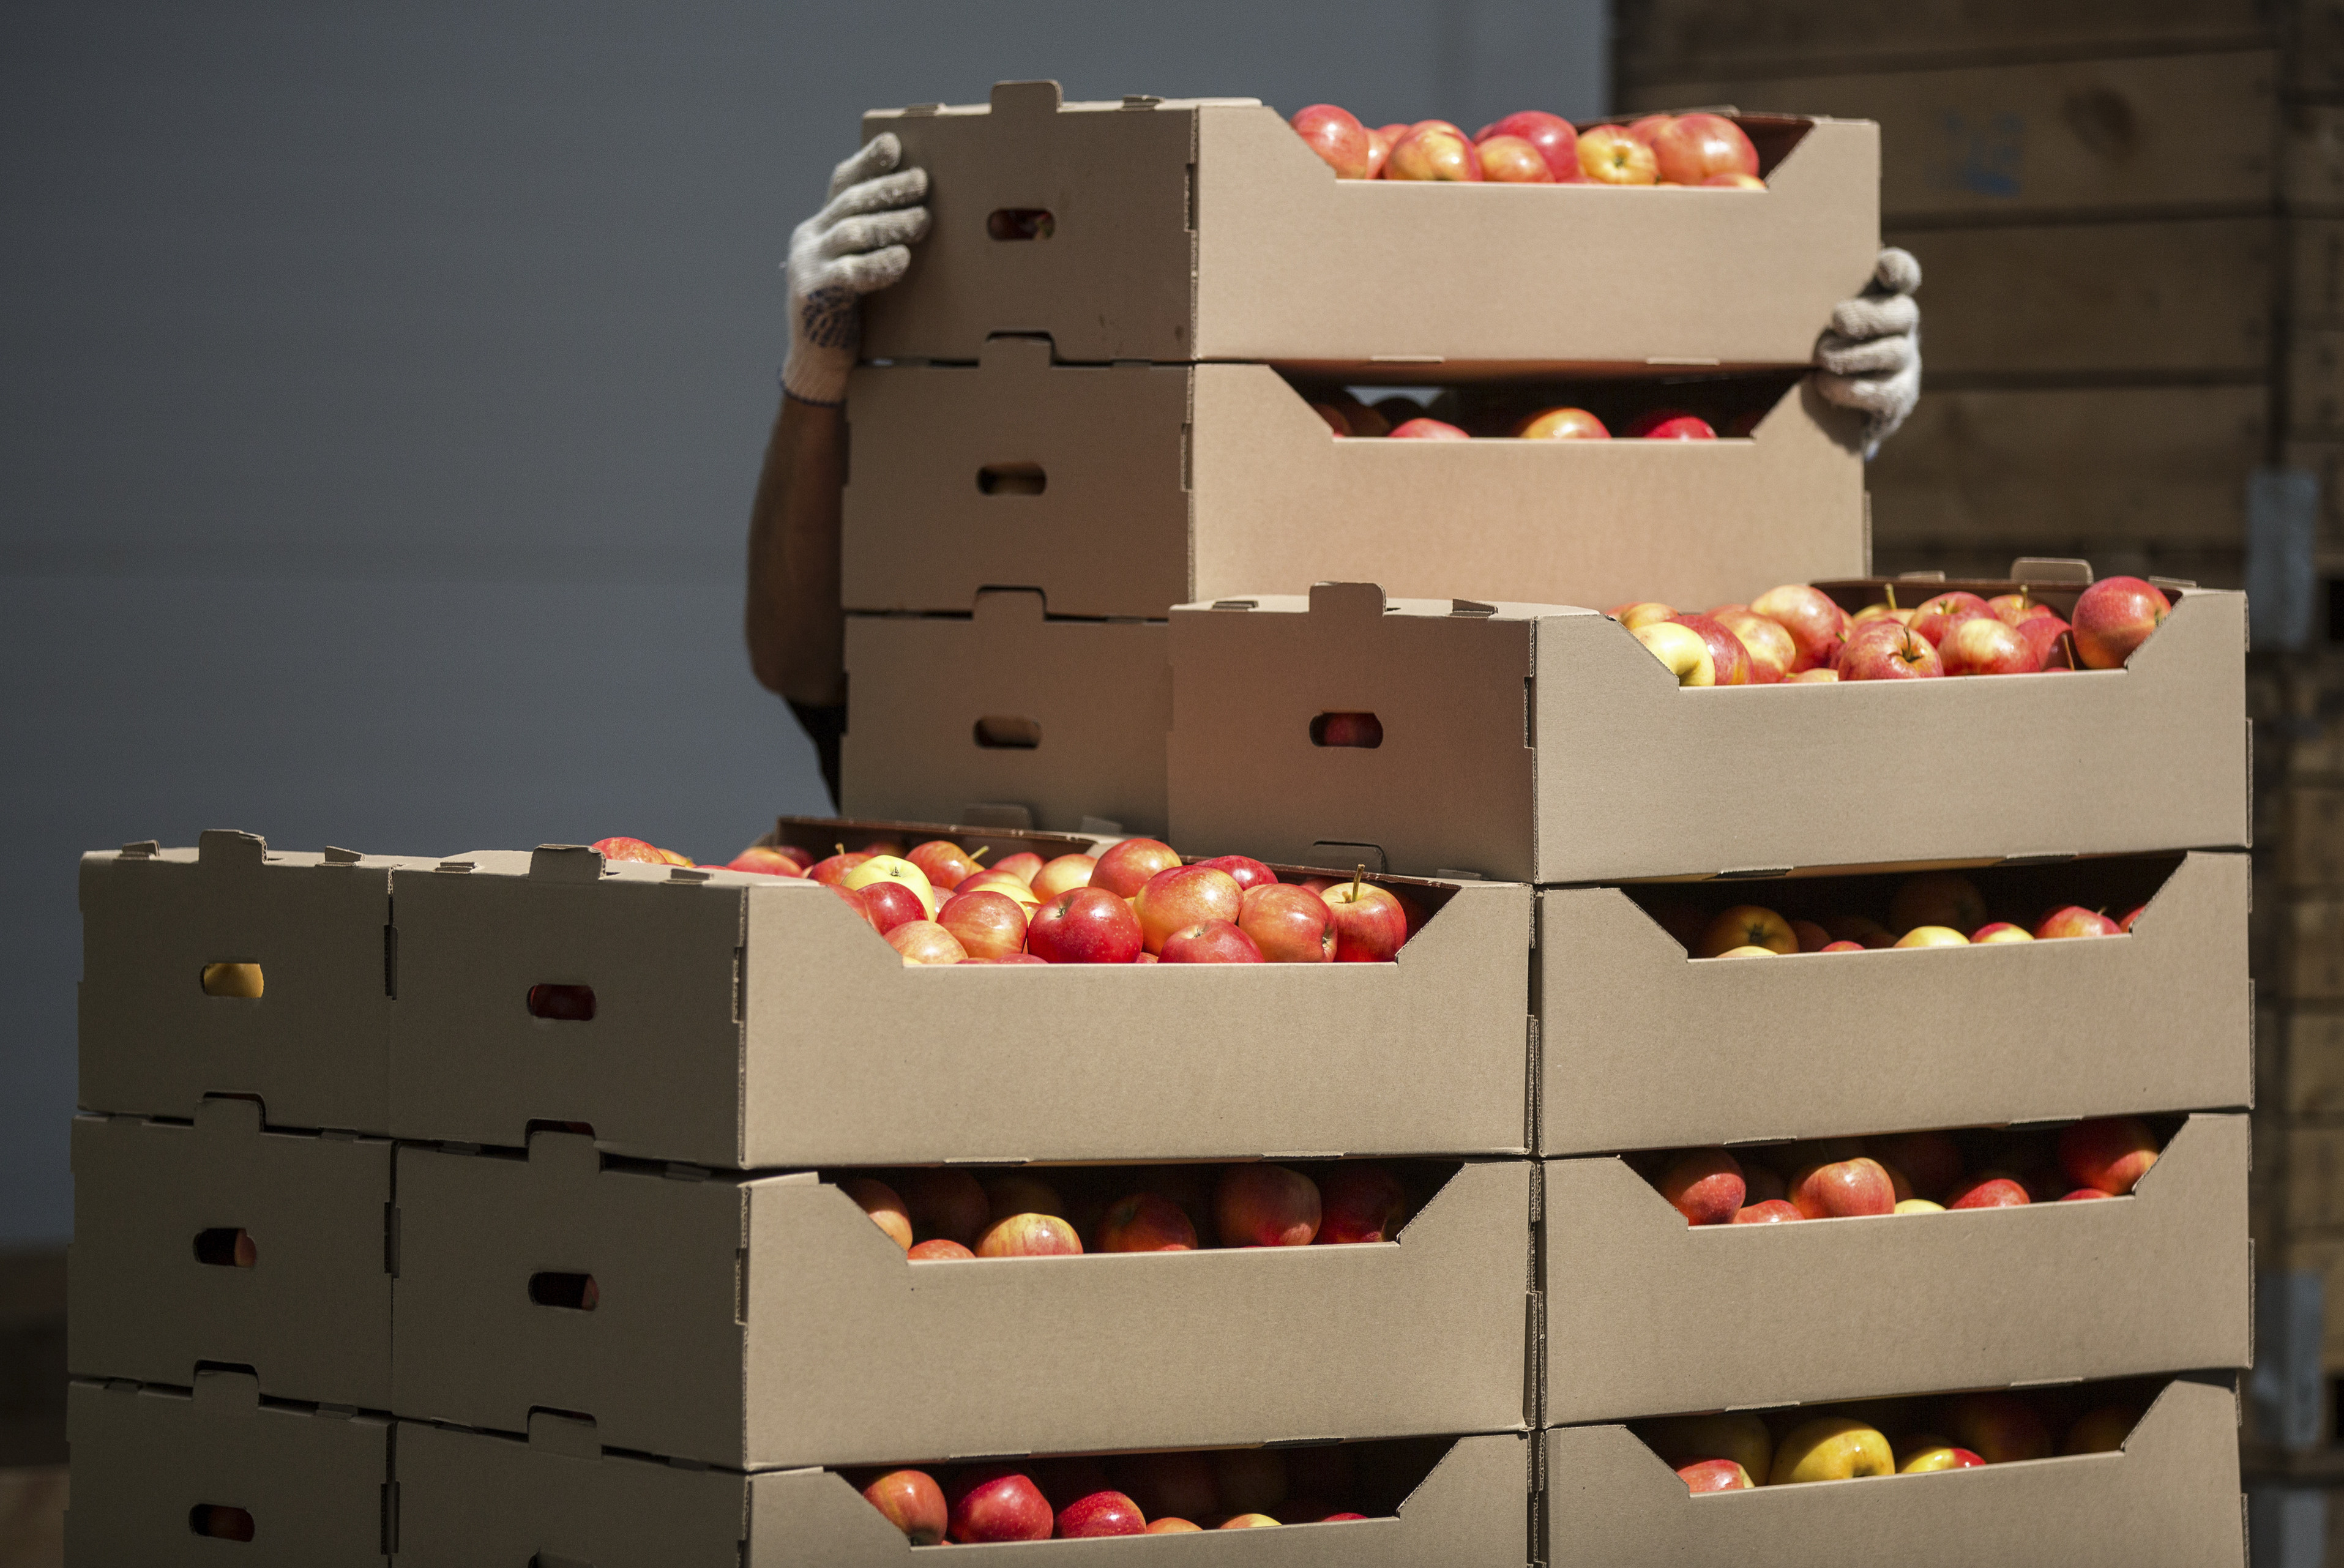 Apples were said to have been brought into Indonesia by Dutch colonisers in 1930. File photo: Bloomberg